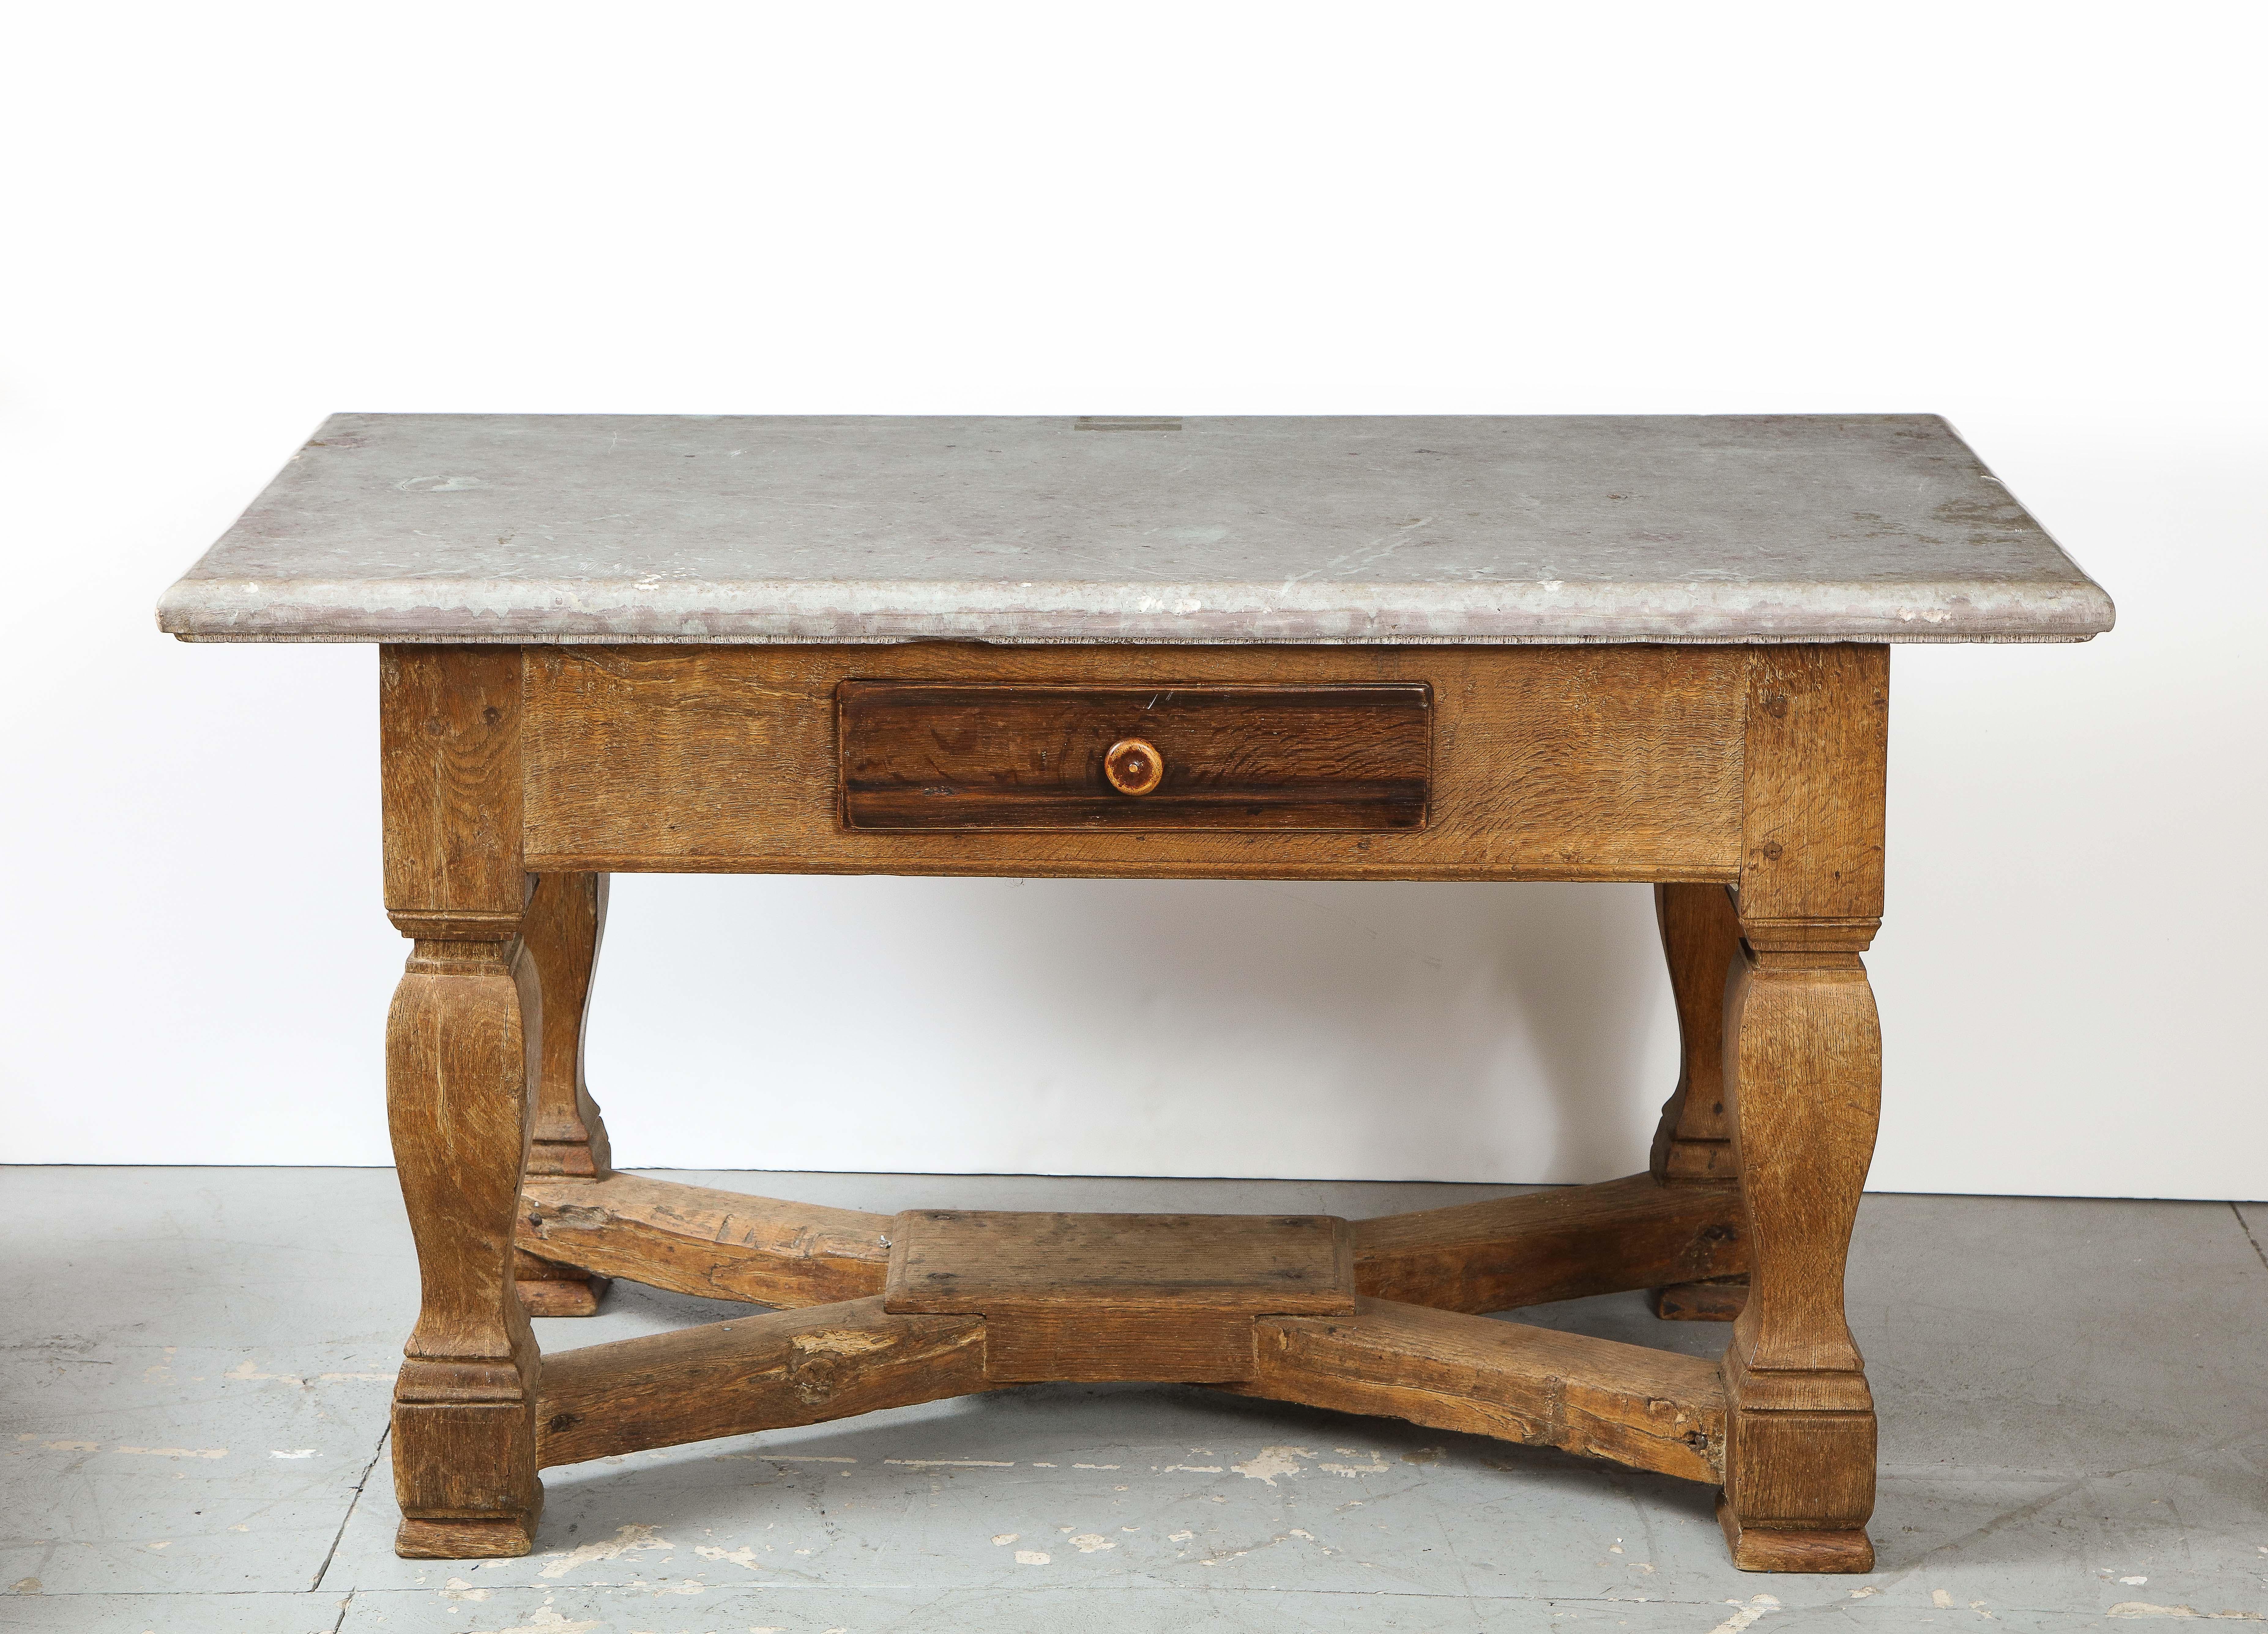 18th C. Swedish Hewn Stone Top & Oak Stretcher Base Table with Drawer
H: 31-3/4 D: 28.75 W: 58 in.   *original stone with excellent patina to stone & base